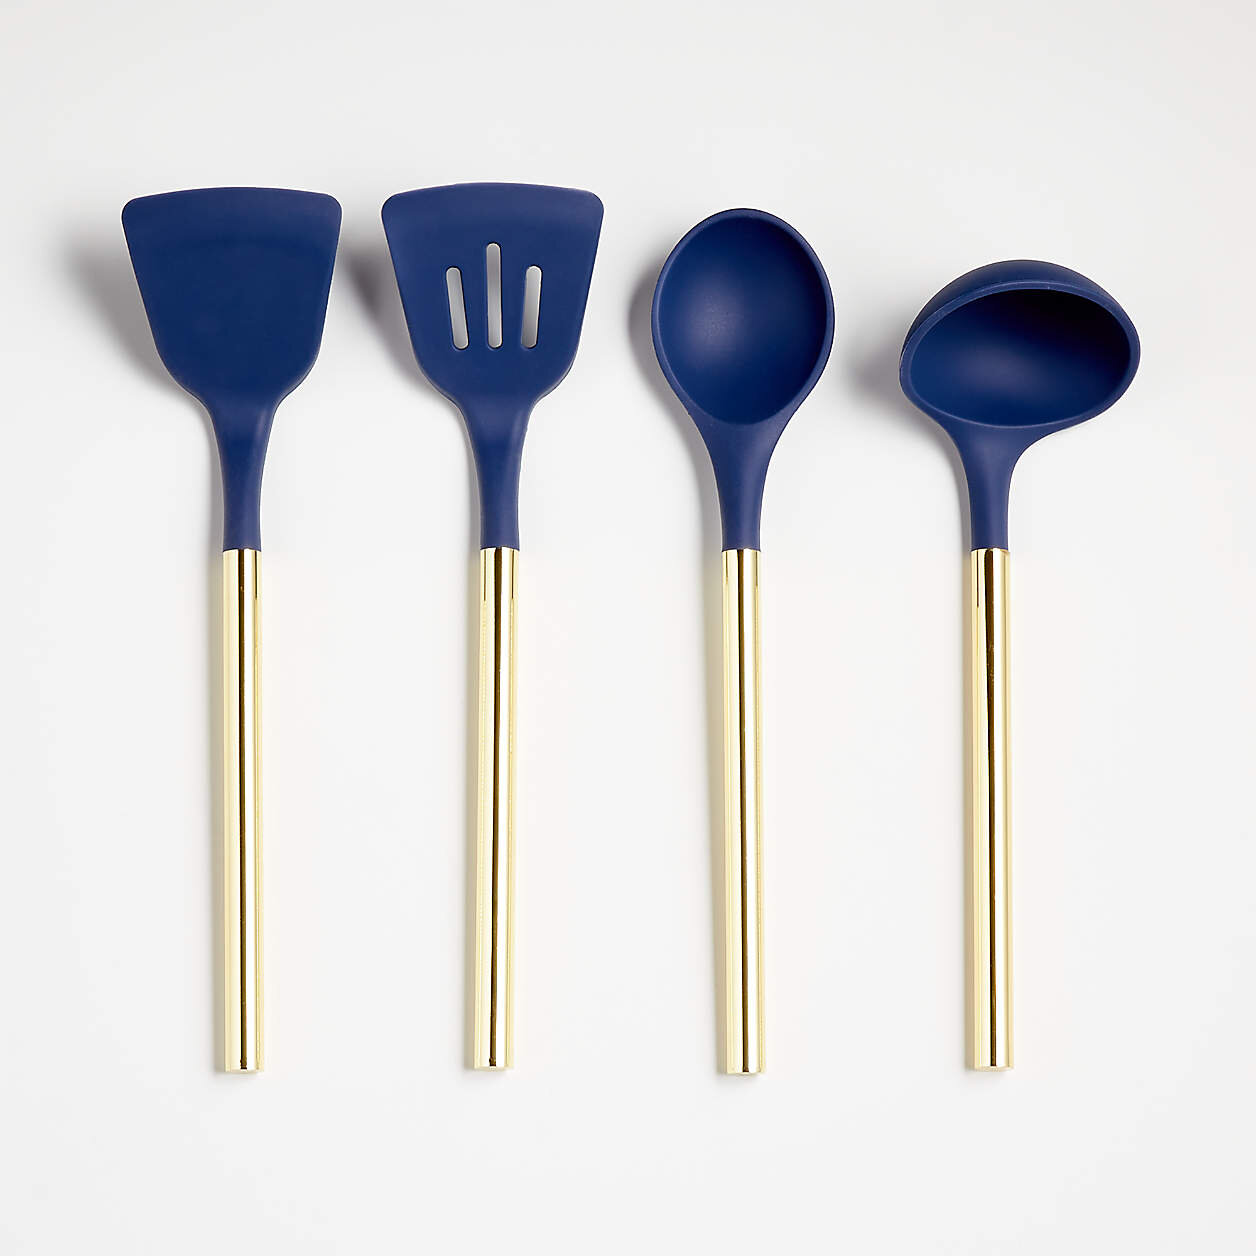 Wyn Blue Silicone Utensils with Brass Handles, Set of 4